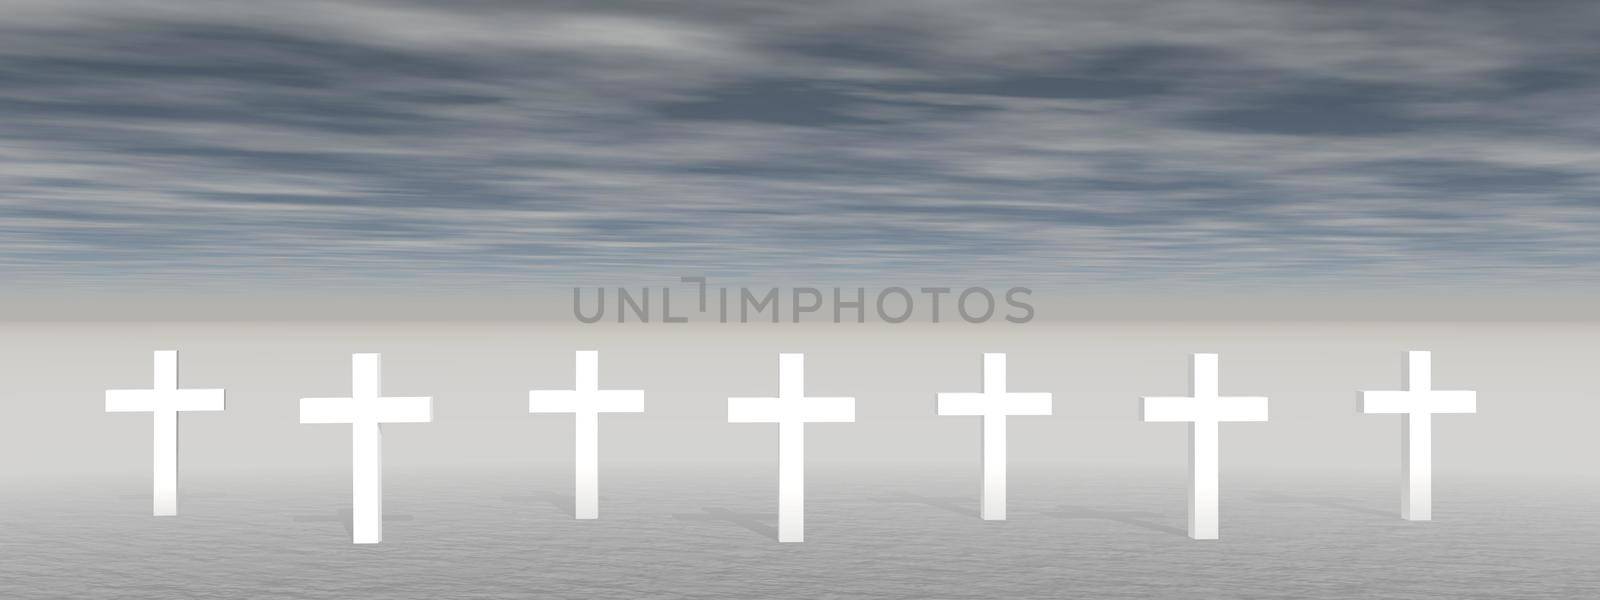 cross on clouds background - 3D rendering by mariephotos